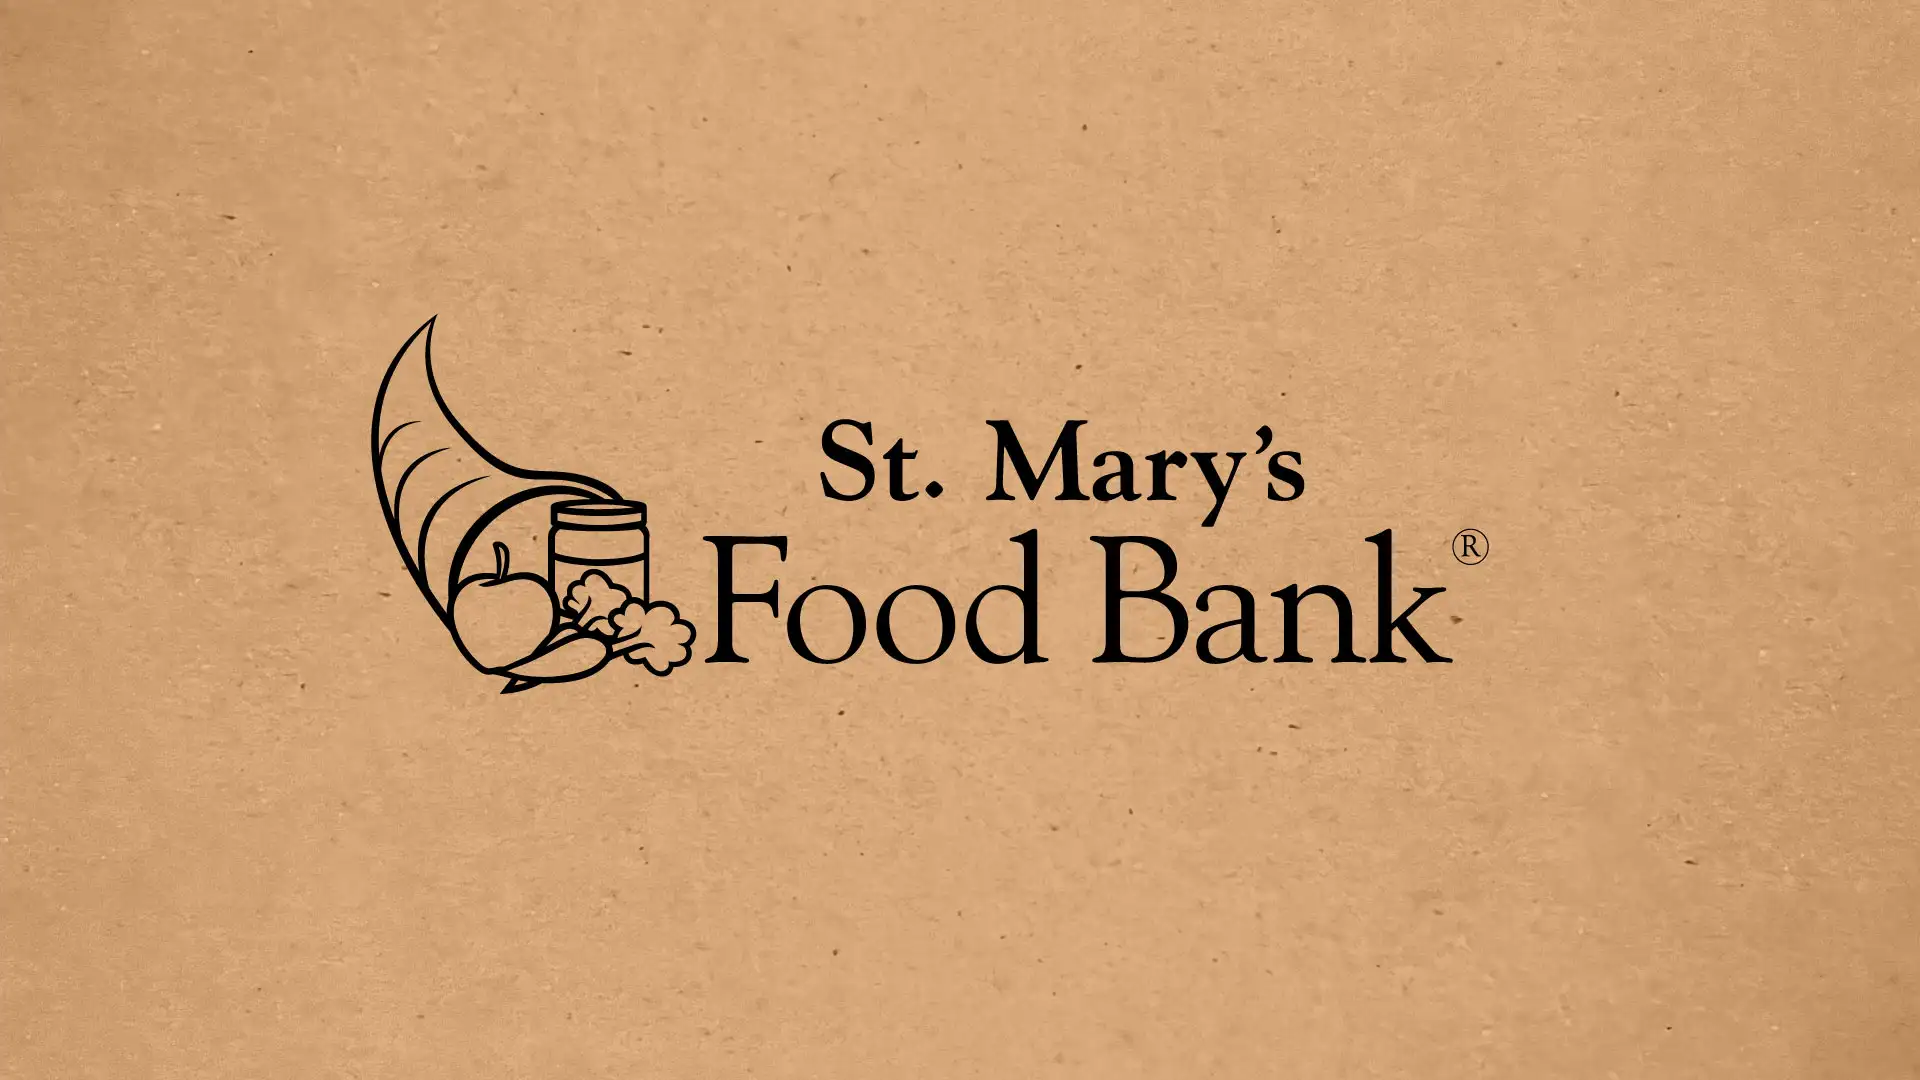 St. Mary's Food Bank logo rebrand by Dusty Drake